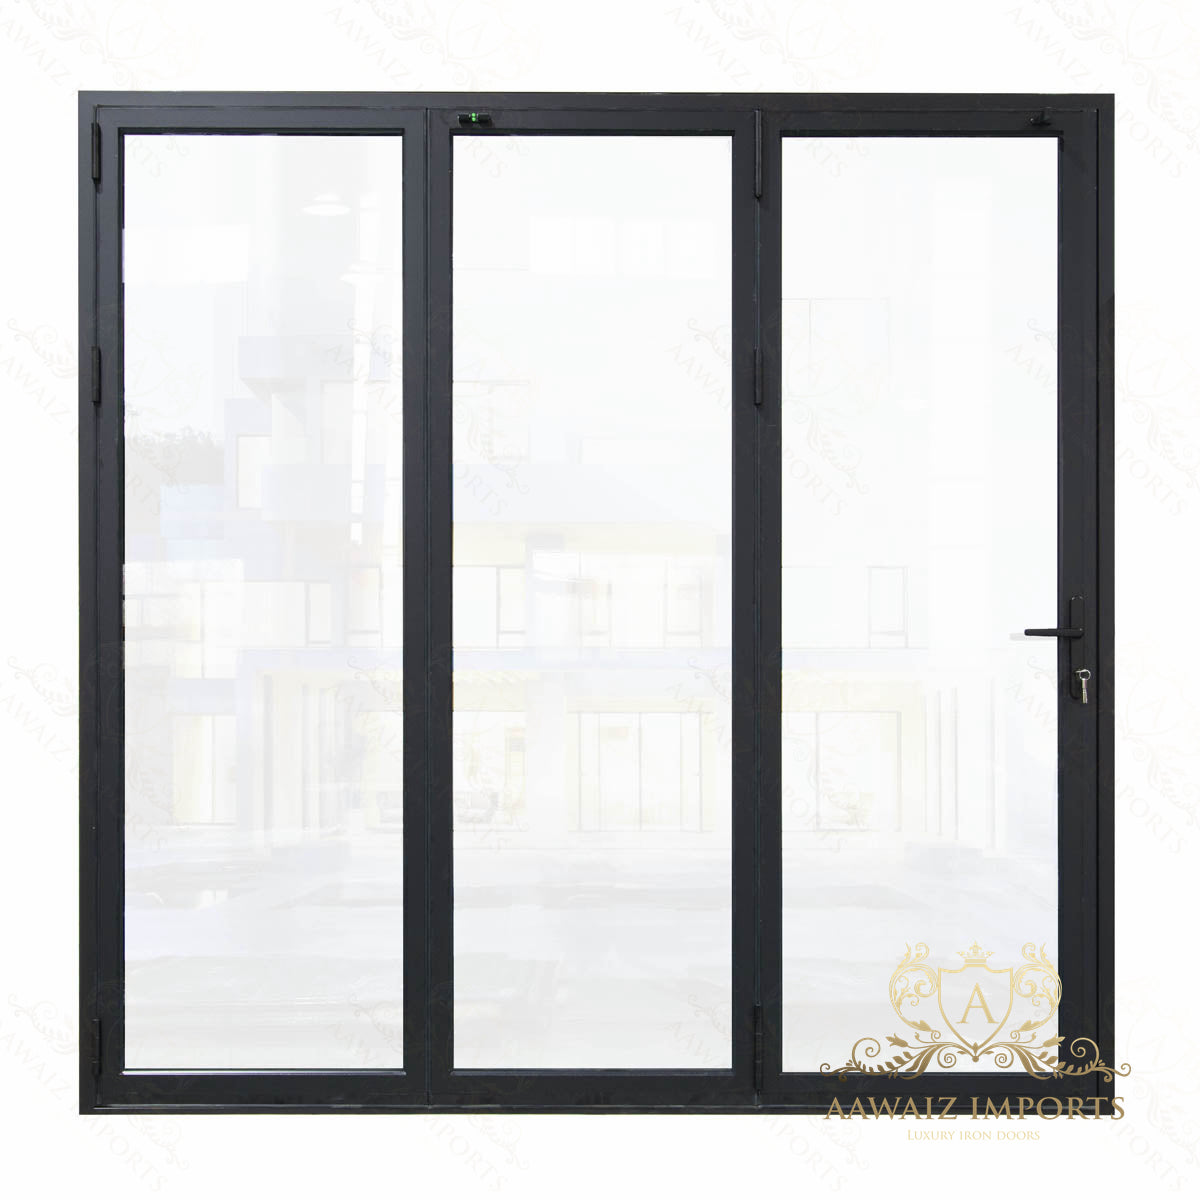 8 Ft Wide By 8 Ft Tall (96" By 96") Aluminum Bi Fold Patio Door Outswing  Thermal Break Insulated Matt Black Finish